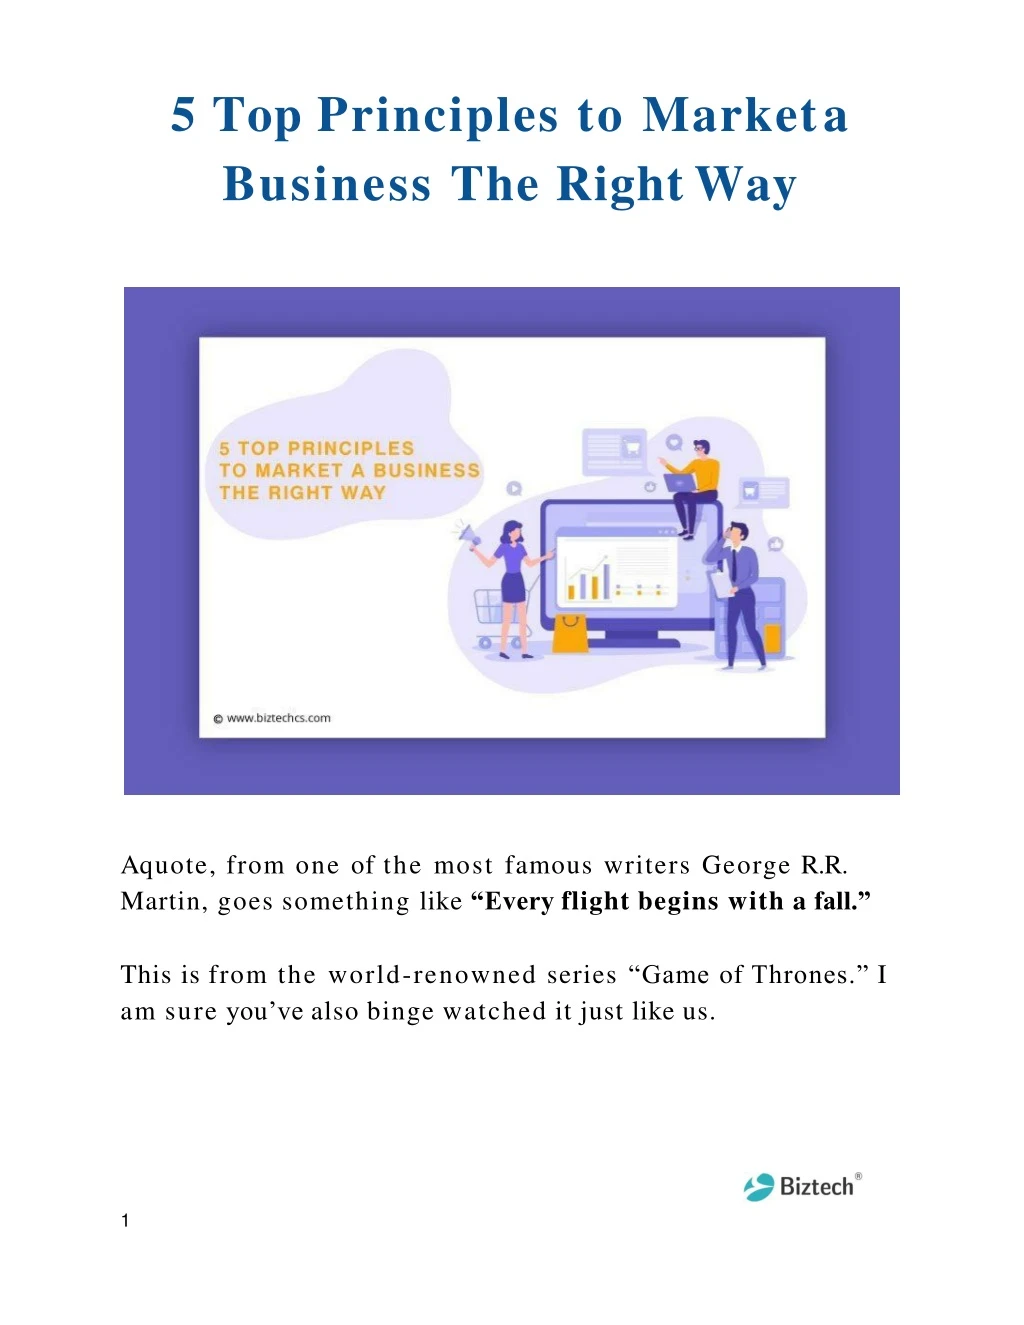 5 top principles to market a business the right way